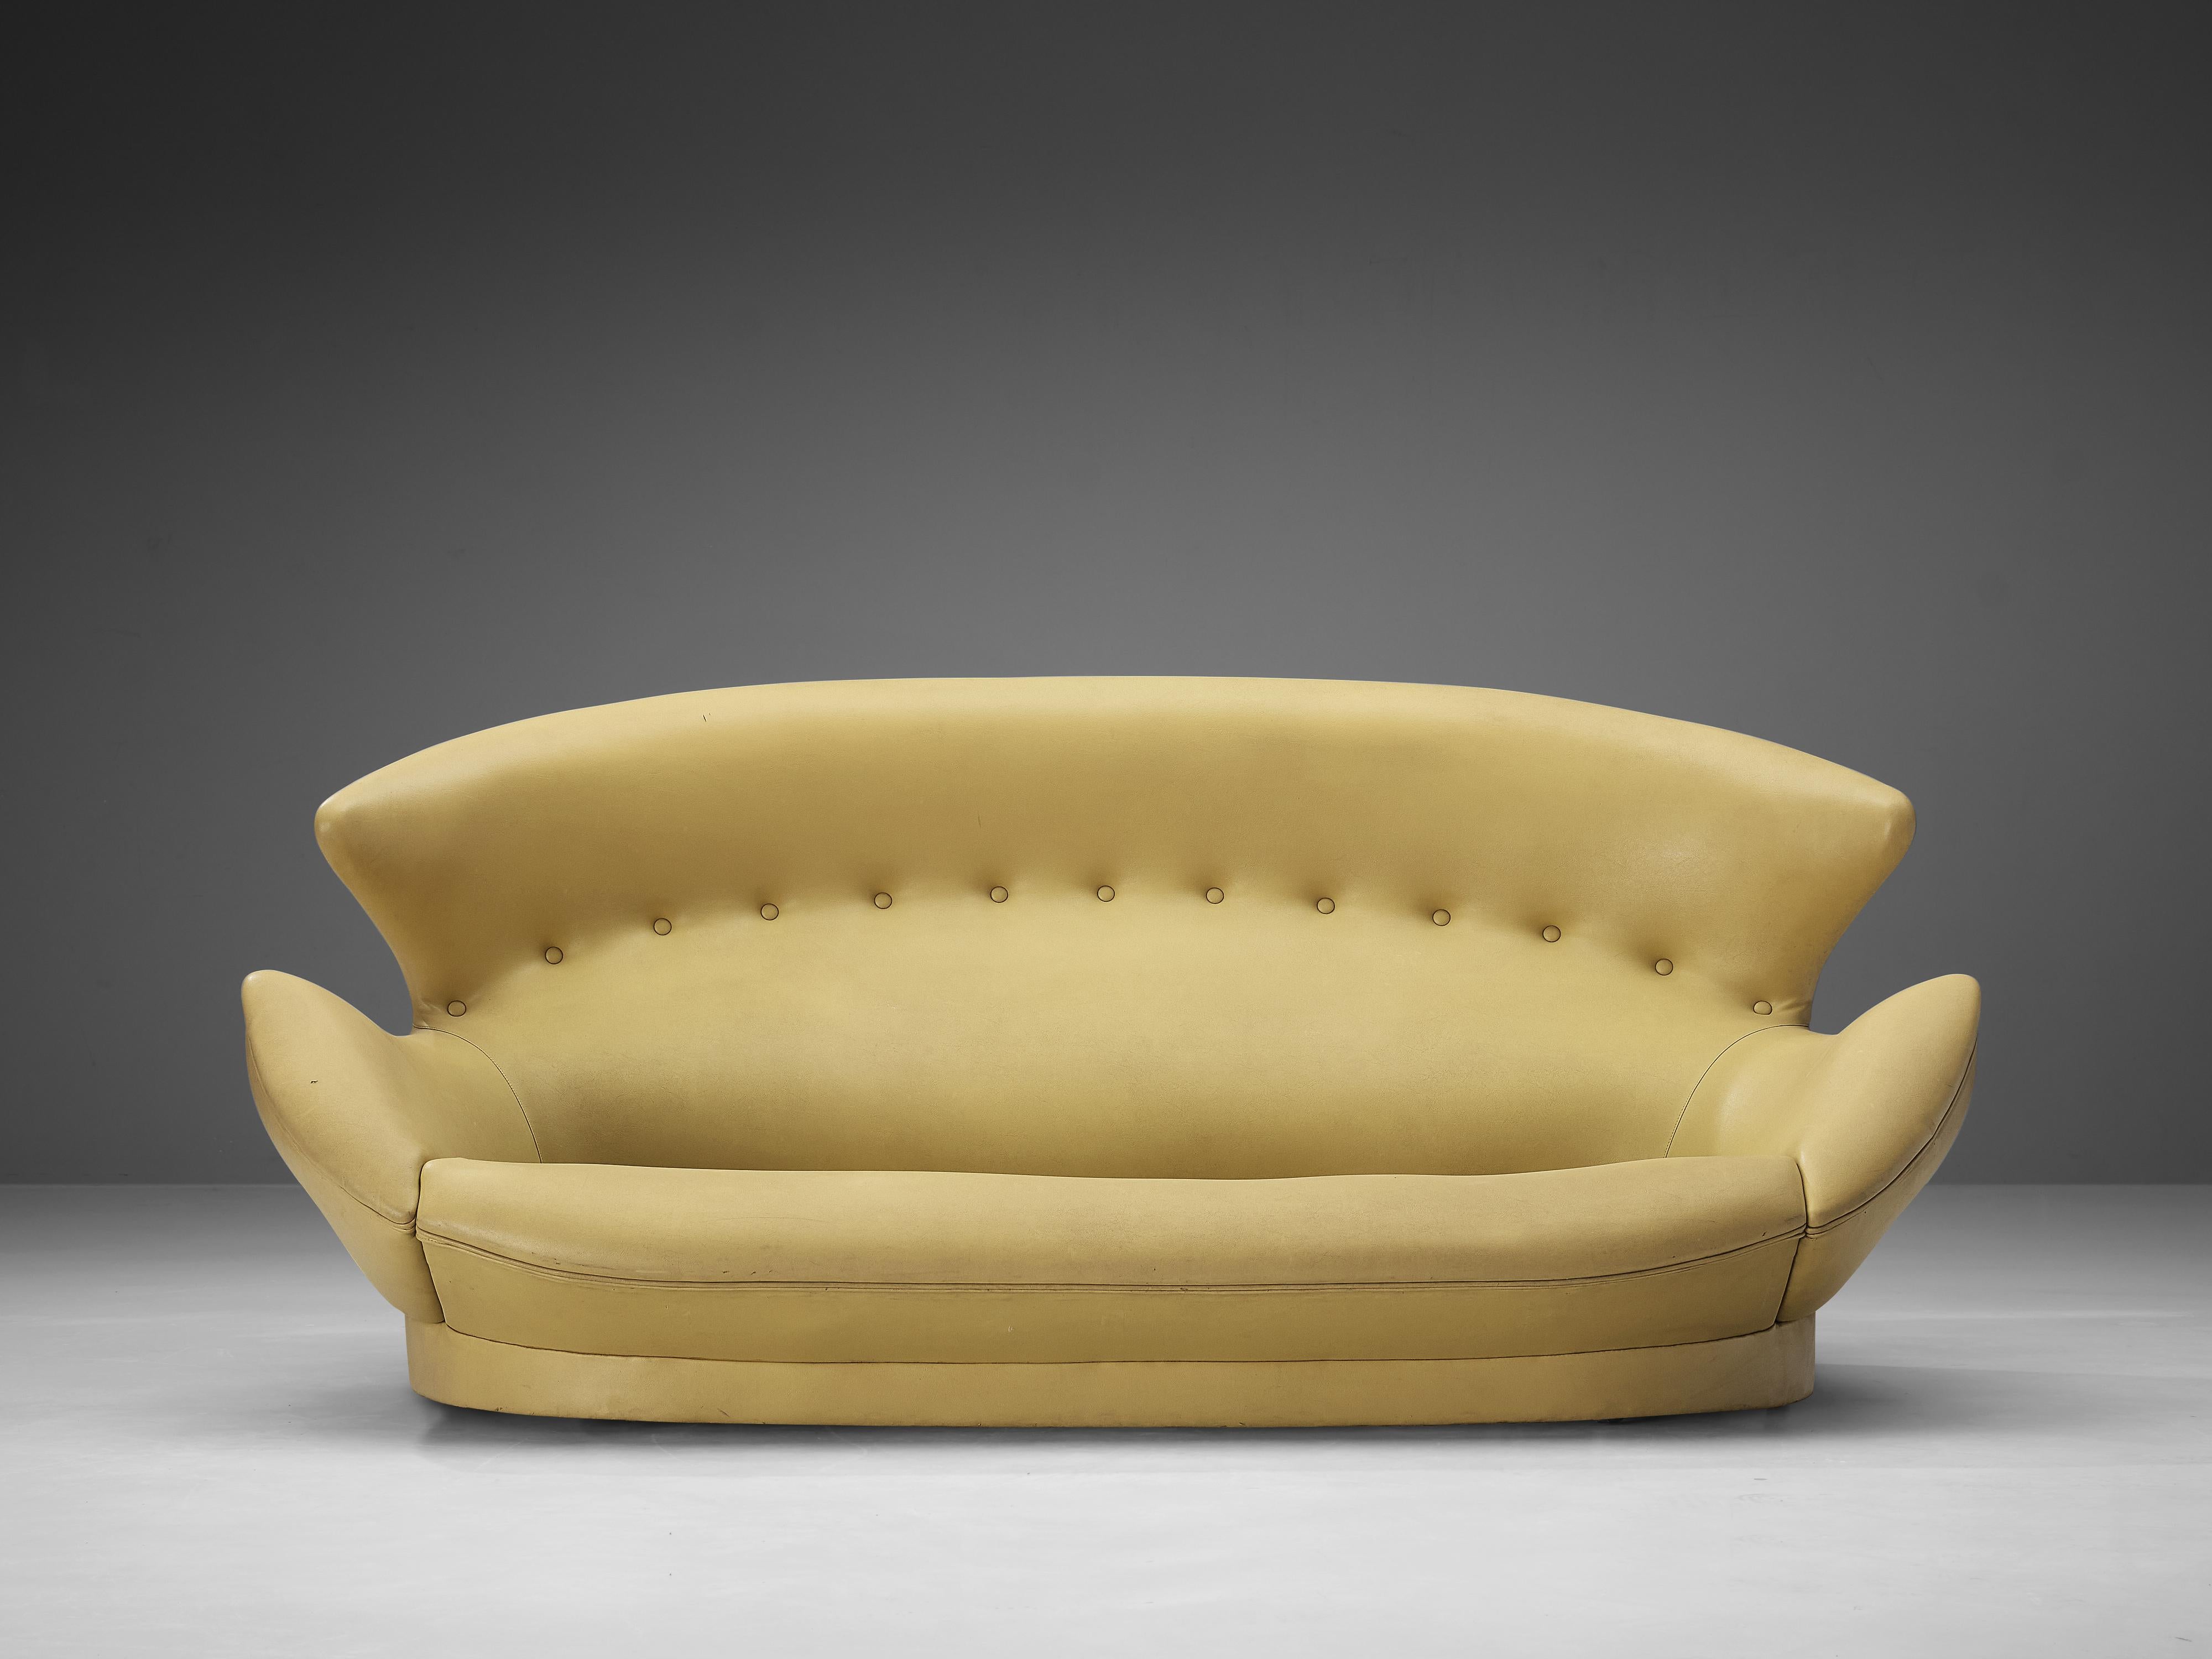 Sofa, leatherette, Italy, 1970s

An a-typical Italian winged sofa, upholstered in vibrant yellow faux leather. Its rounded design, with winged sides extending toward the armrests, creates a cozy, almost embracing feel for those seated.

Kindly note